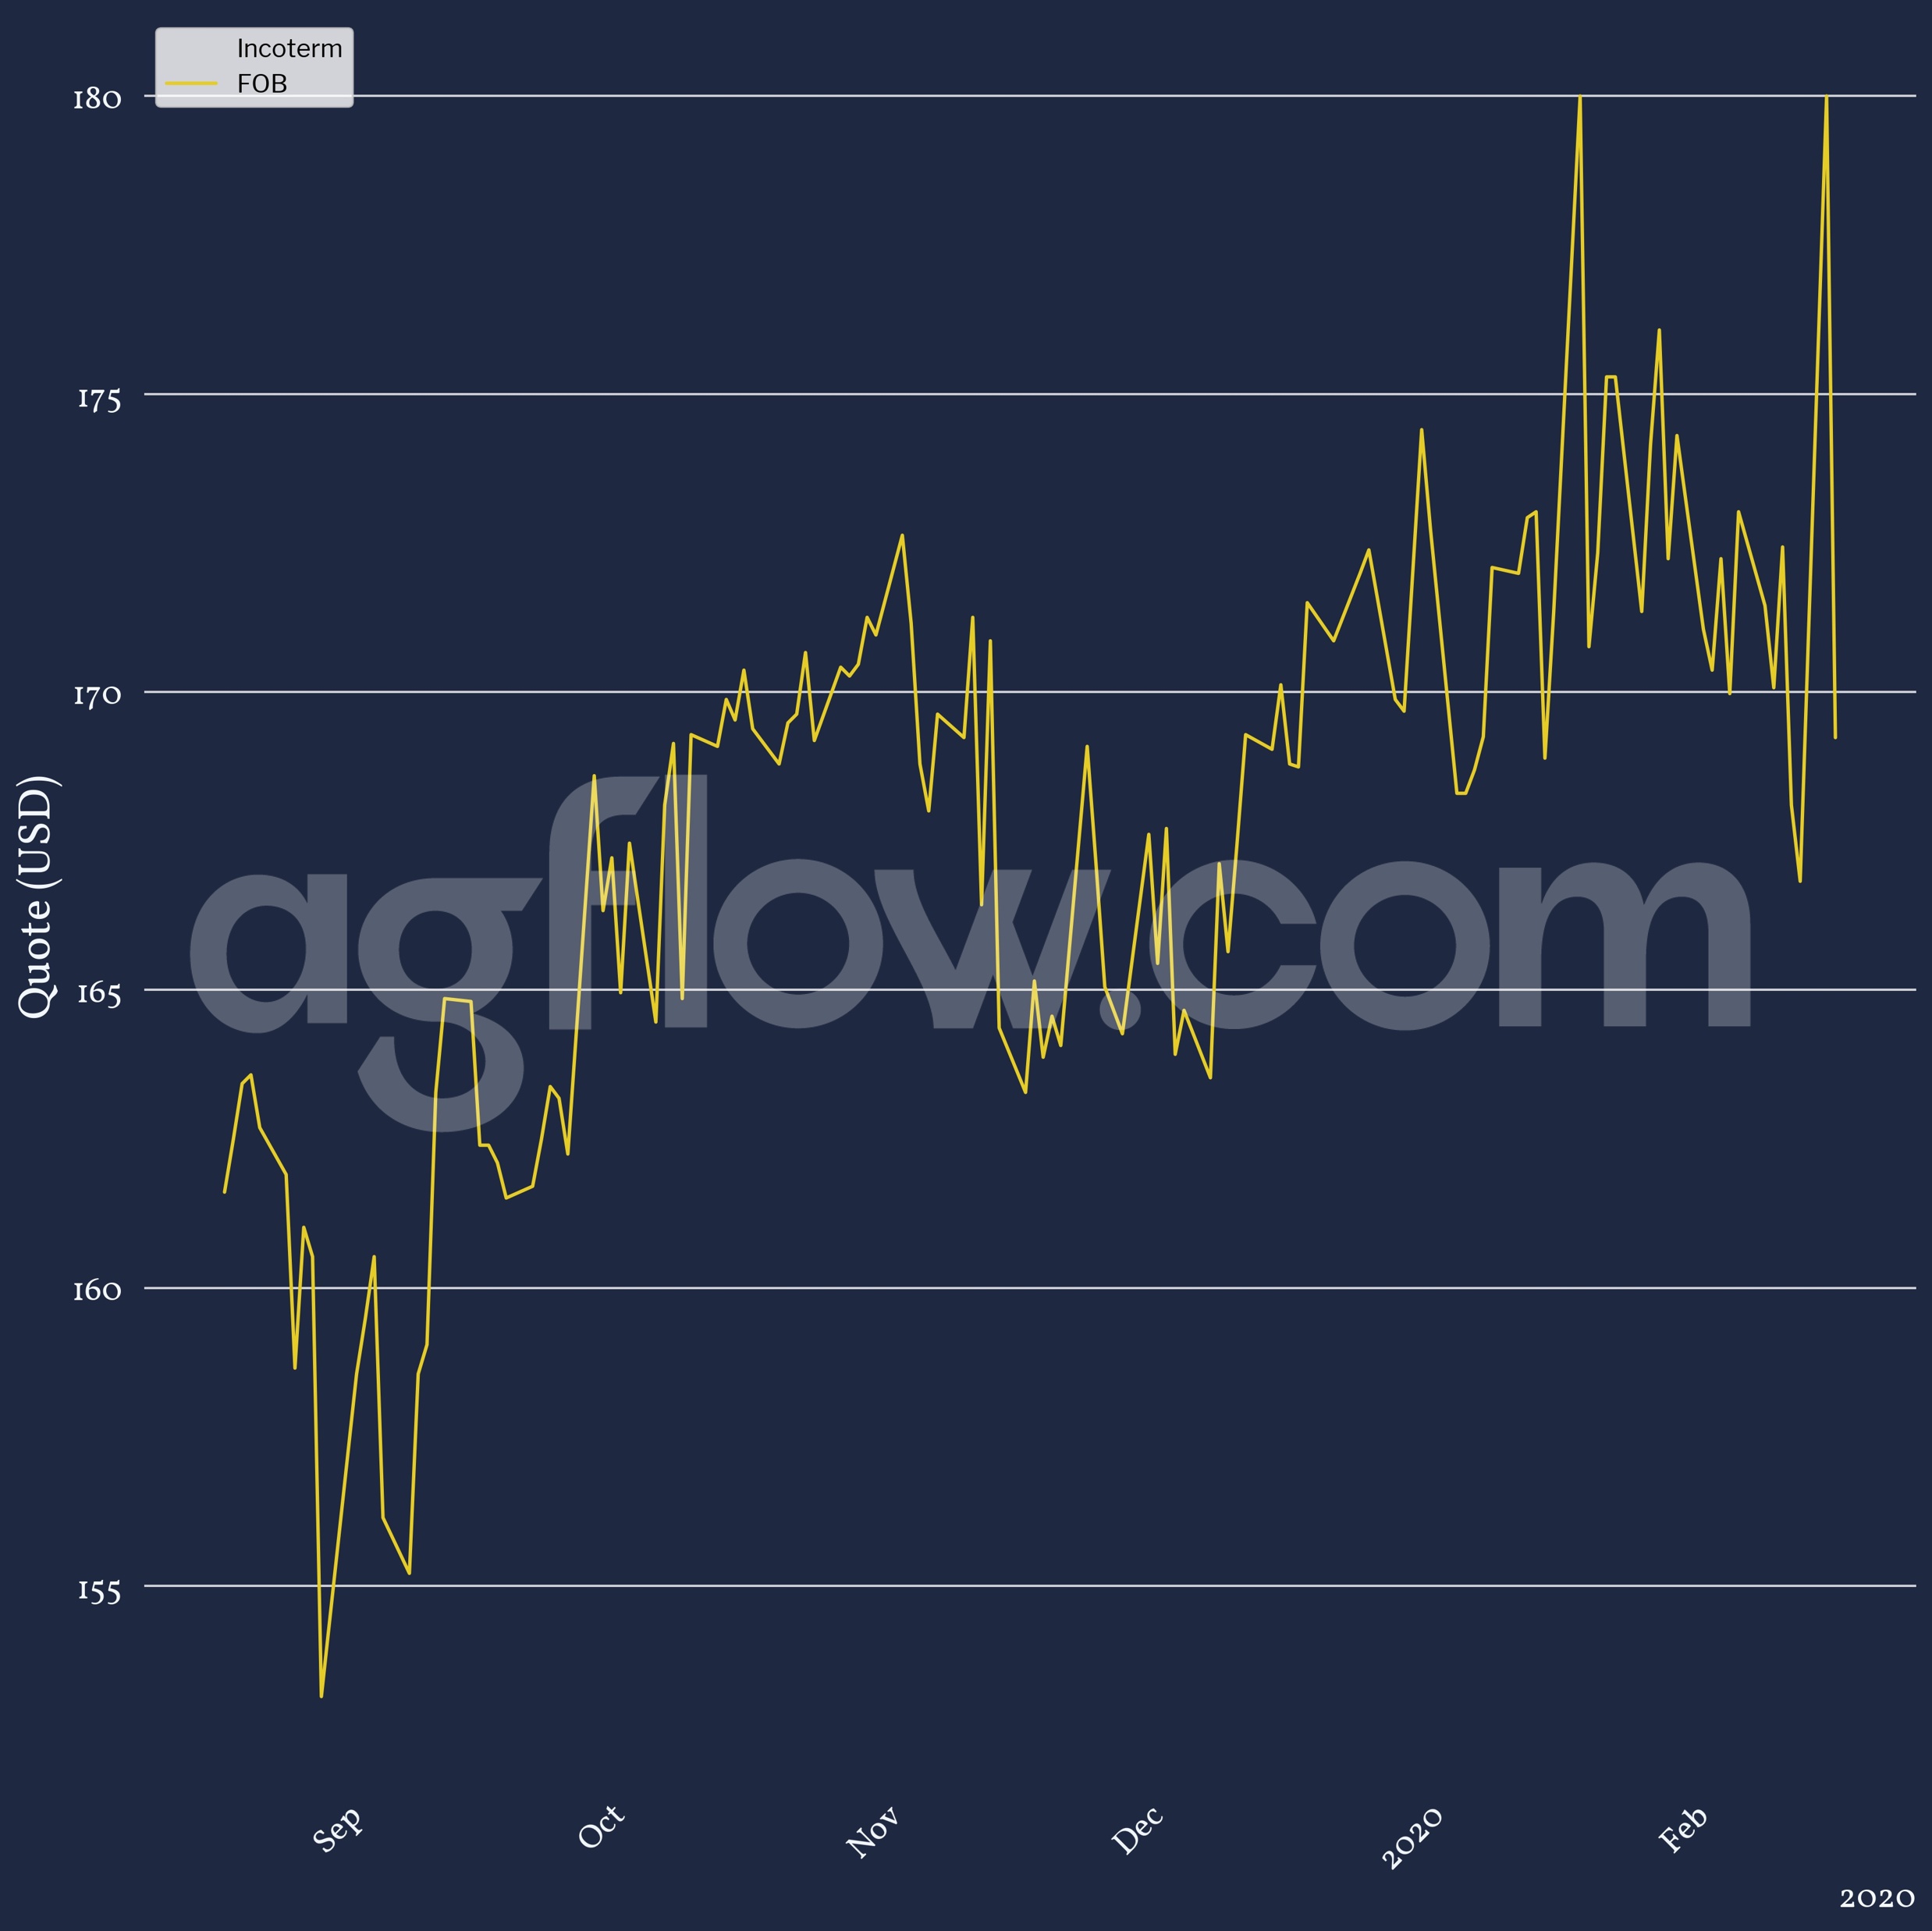 Brazil Corn FOB Cash Spot Prices From Sep 2019 to Feb 2020